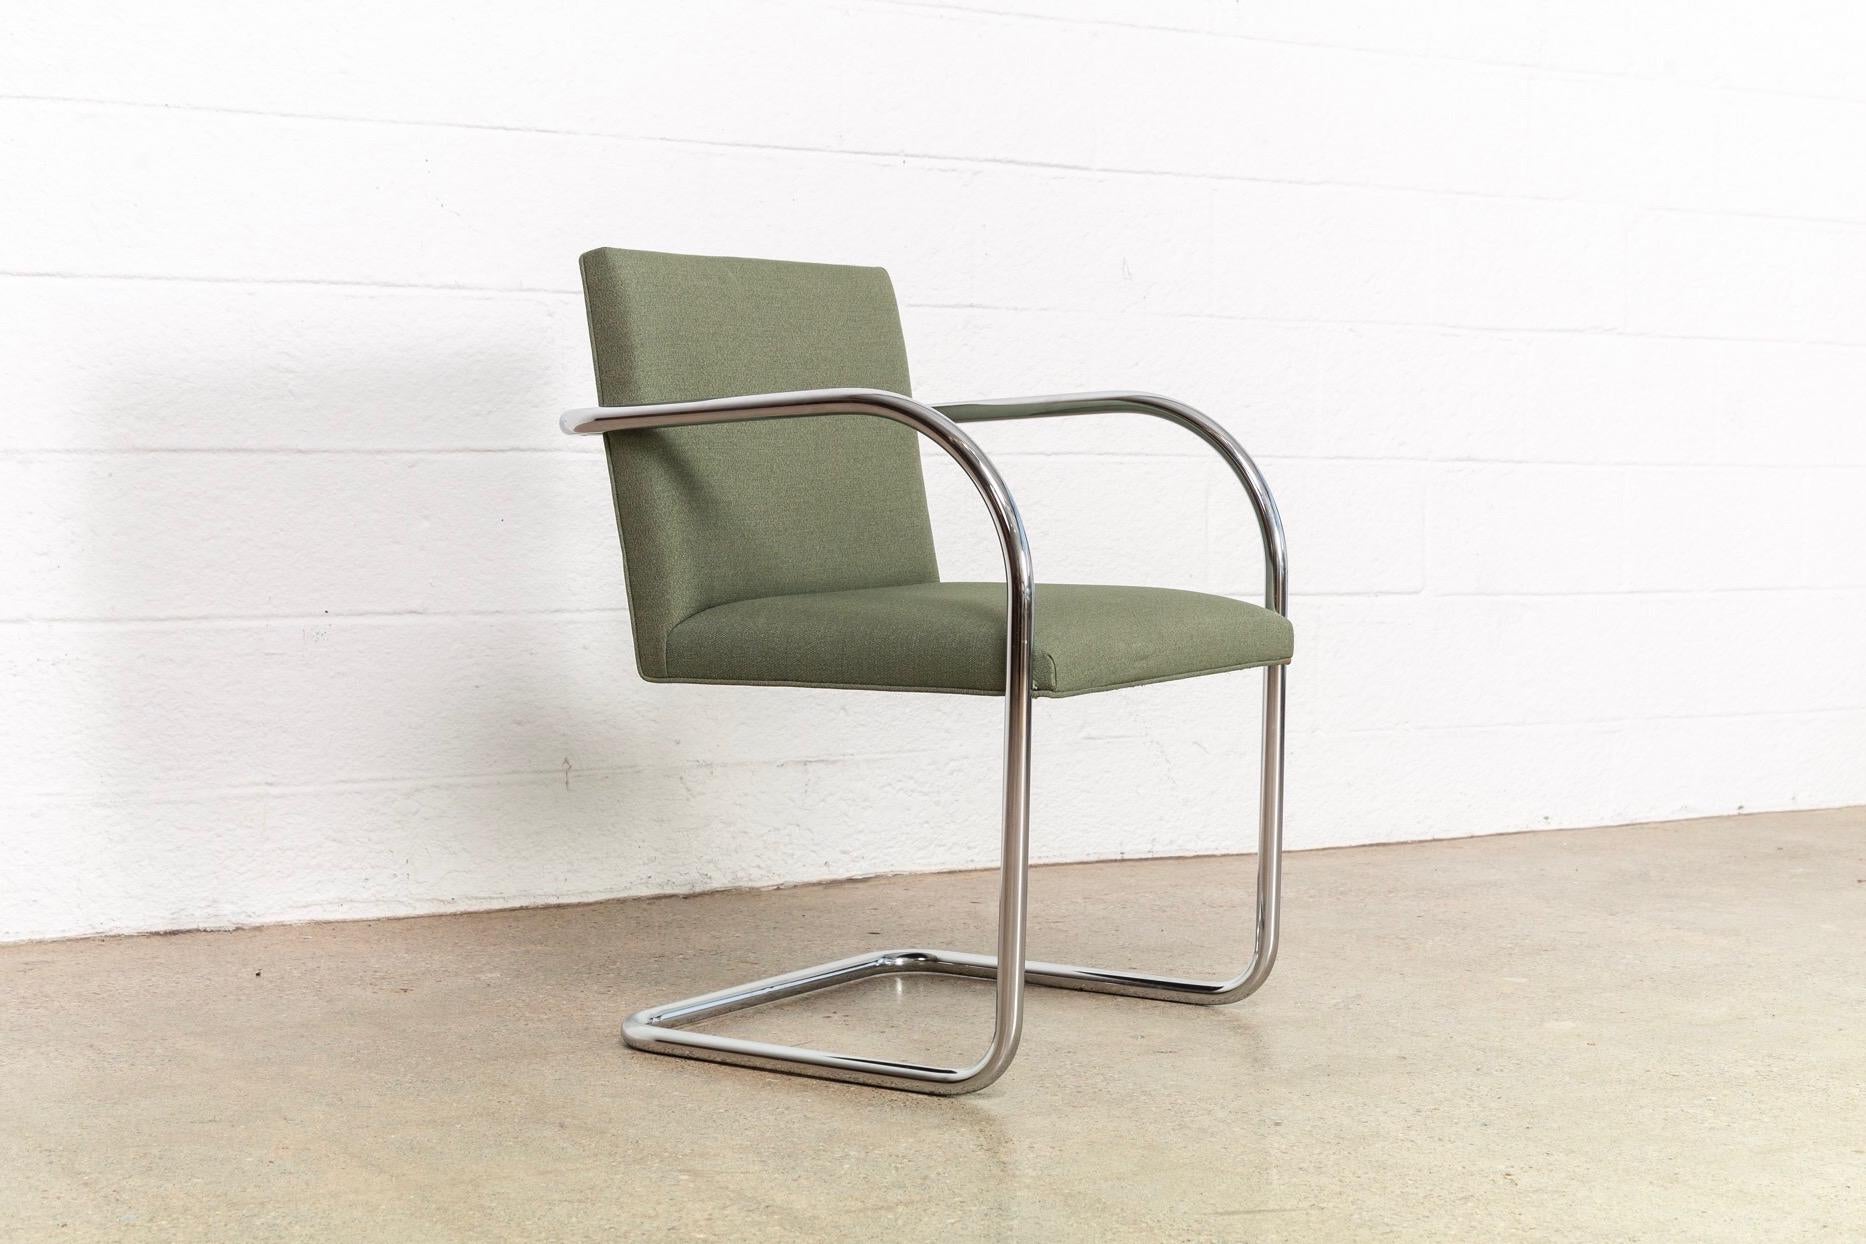 Mies van der Rohe Green Brno Chrome Cantilever Dining Chairs, Set of 4 For Sale 1